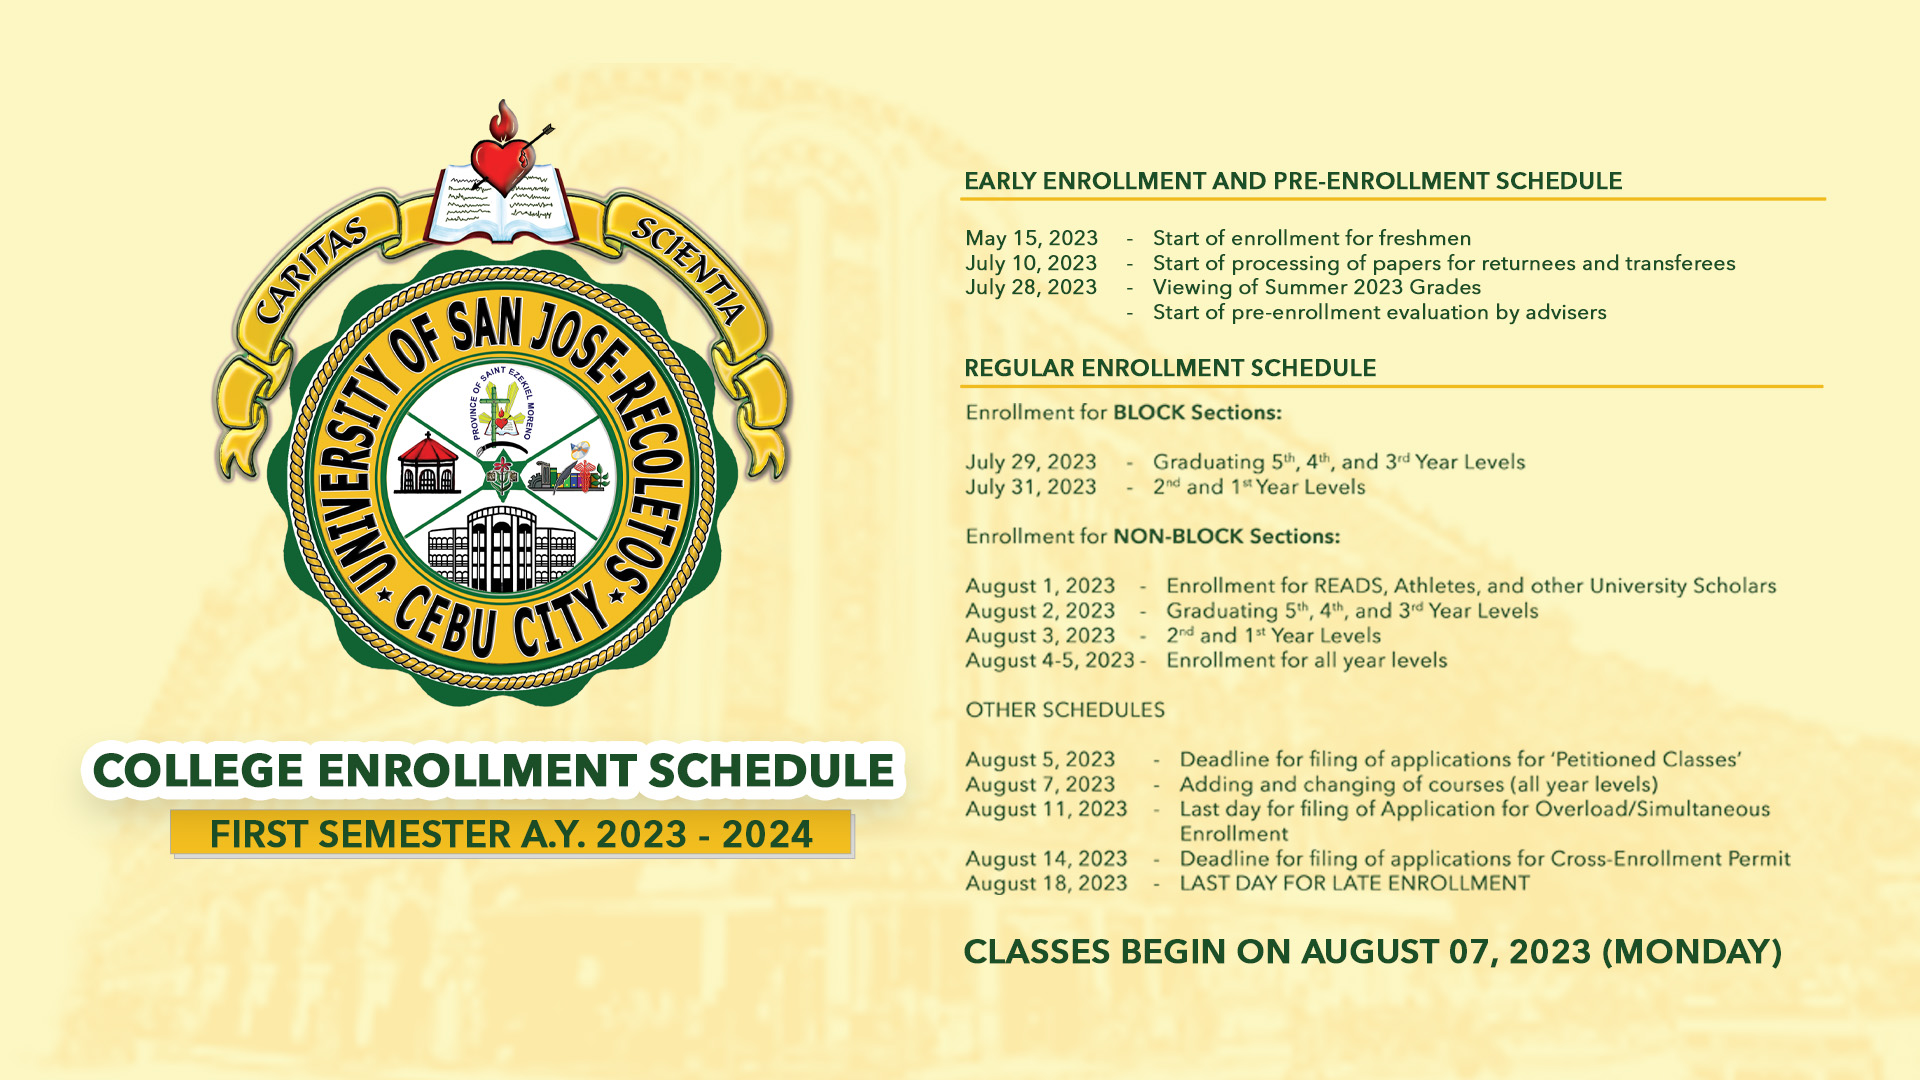 USJ-R publishes schedule of enrollment for AY 2023-2024 first semester